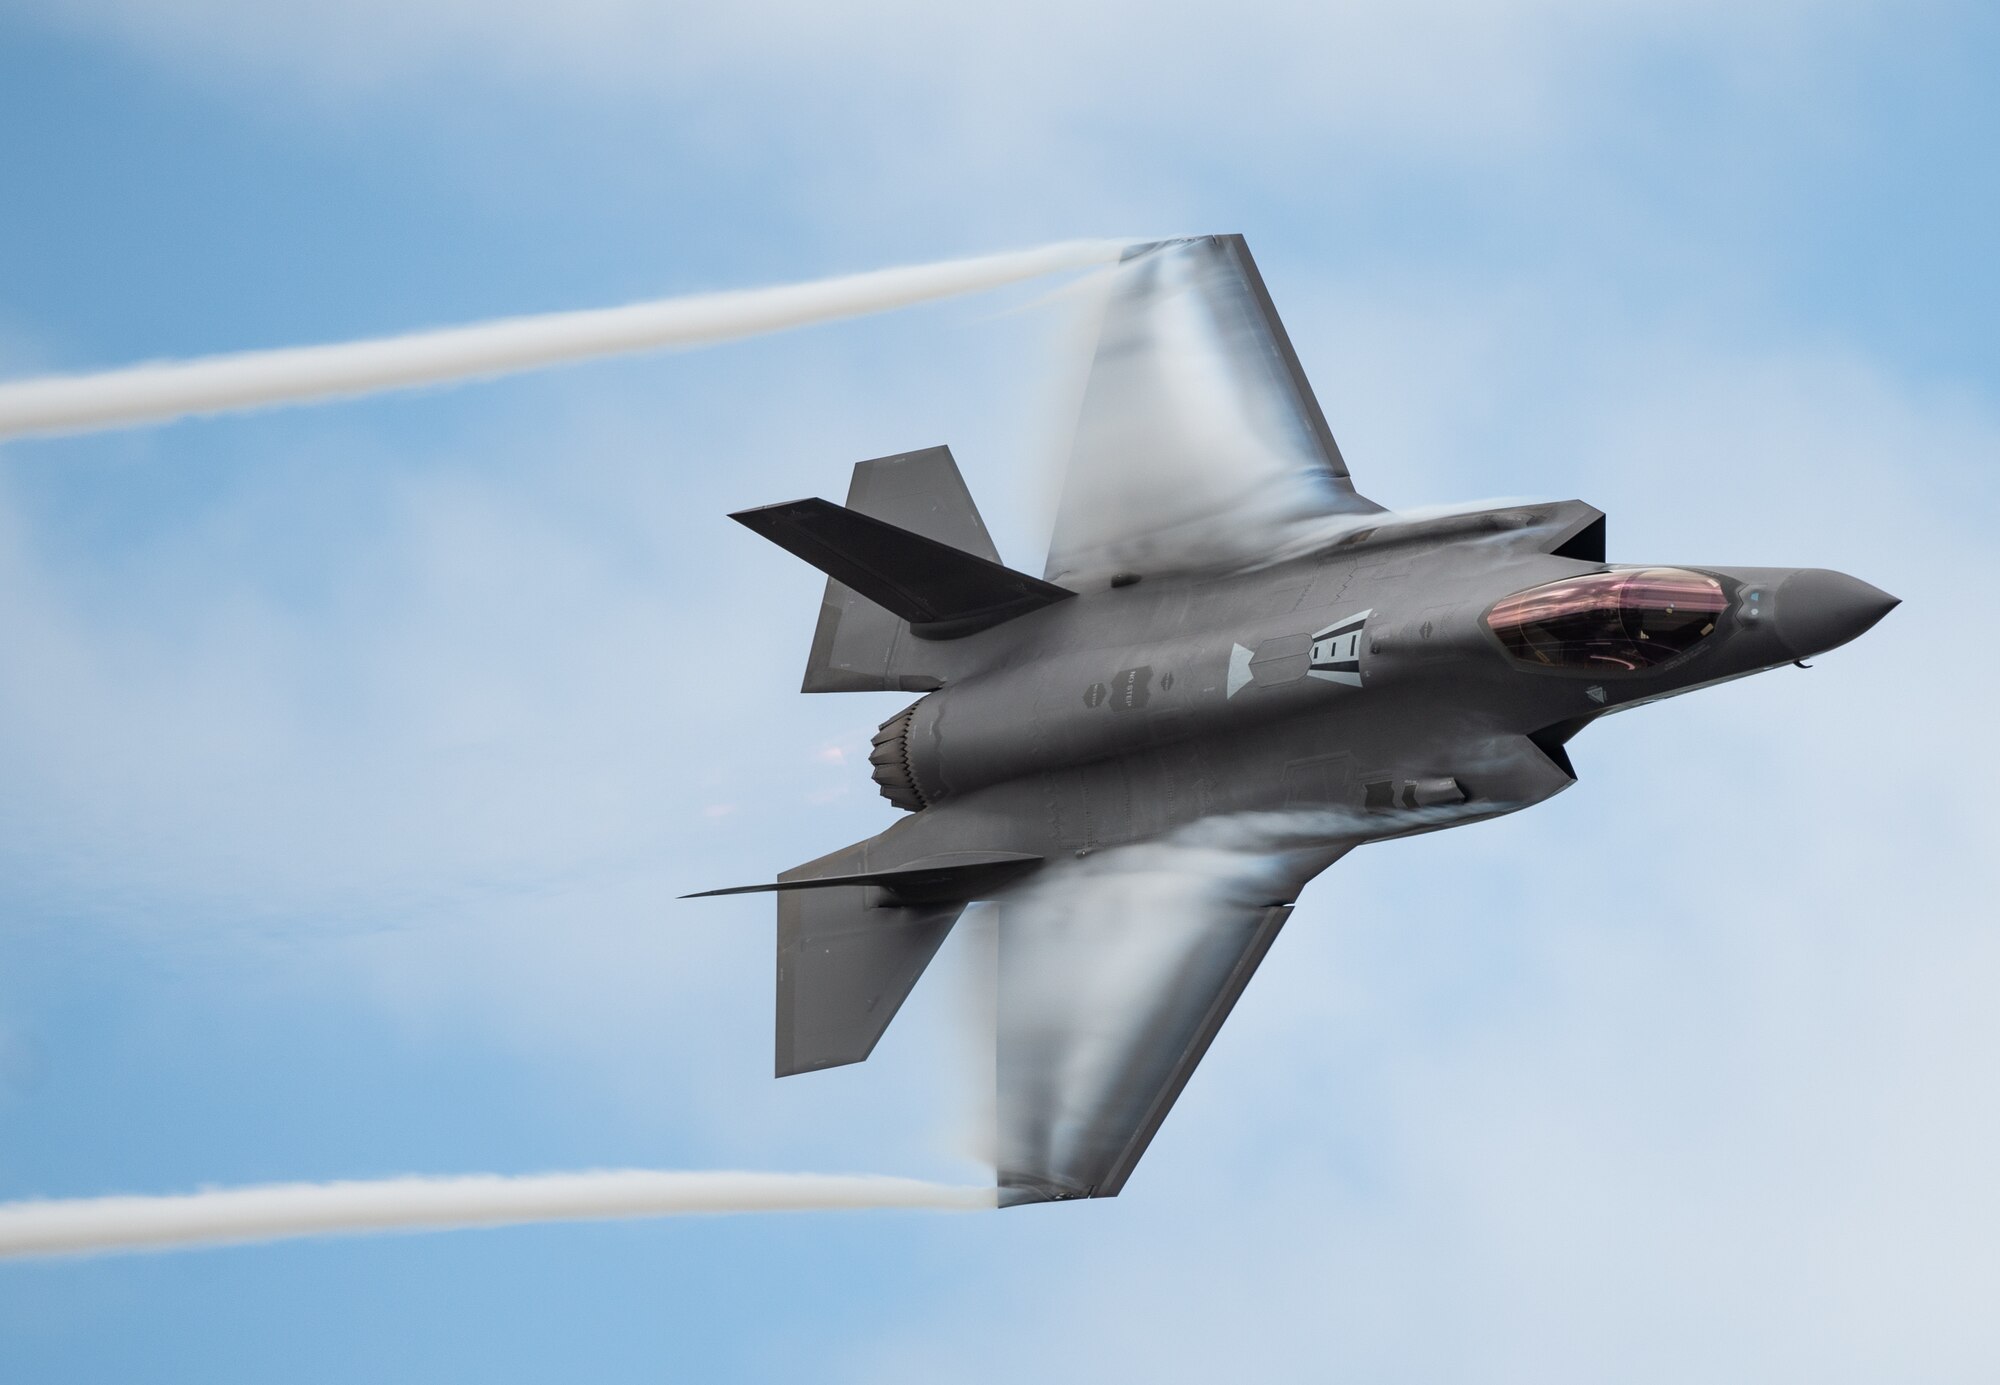 U.S. Air Force Capt. Andrew “Dojo” Olson, F-35 Demonstration Team pilot and commander, performs a dedication pass during the Melbourne Air and Space Show in Melbourne, Fla., March 30, 2019. During the two-day event, more than 50,000 guests attended the Melbourne Air and Space Show. (U.S. Air Force photo by Senior Airman Alexander Cook)